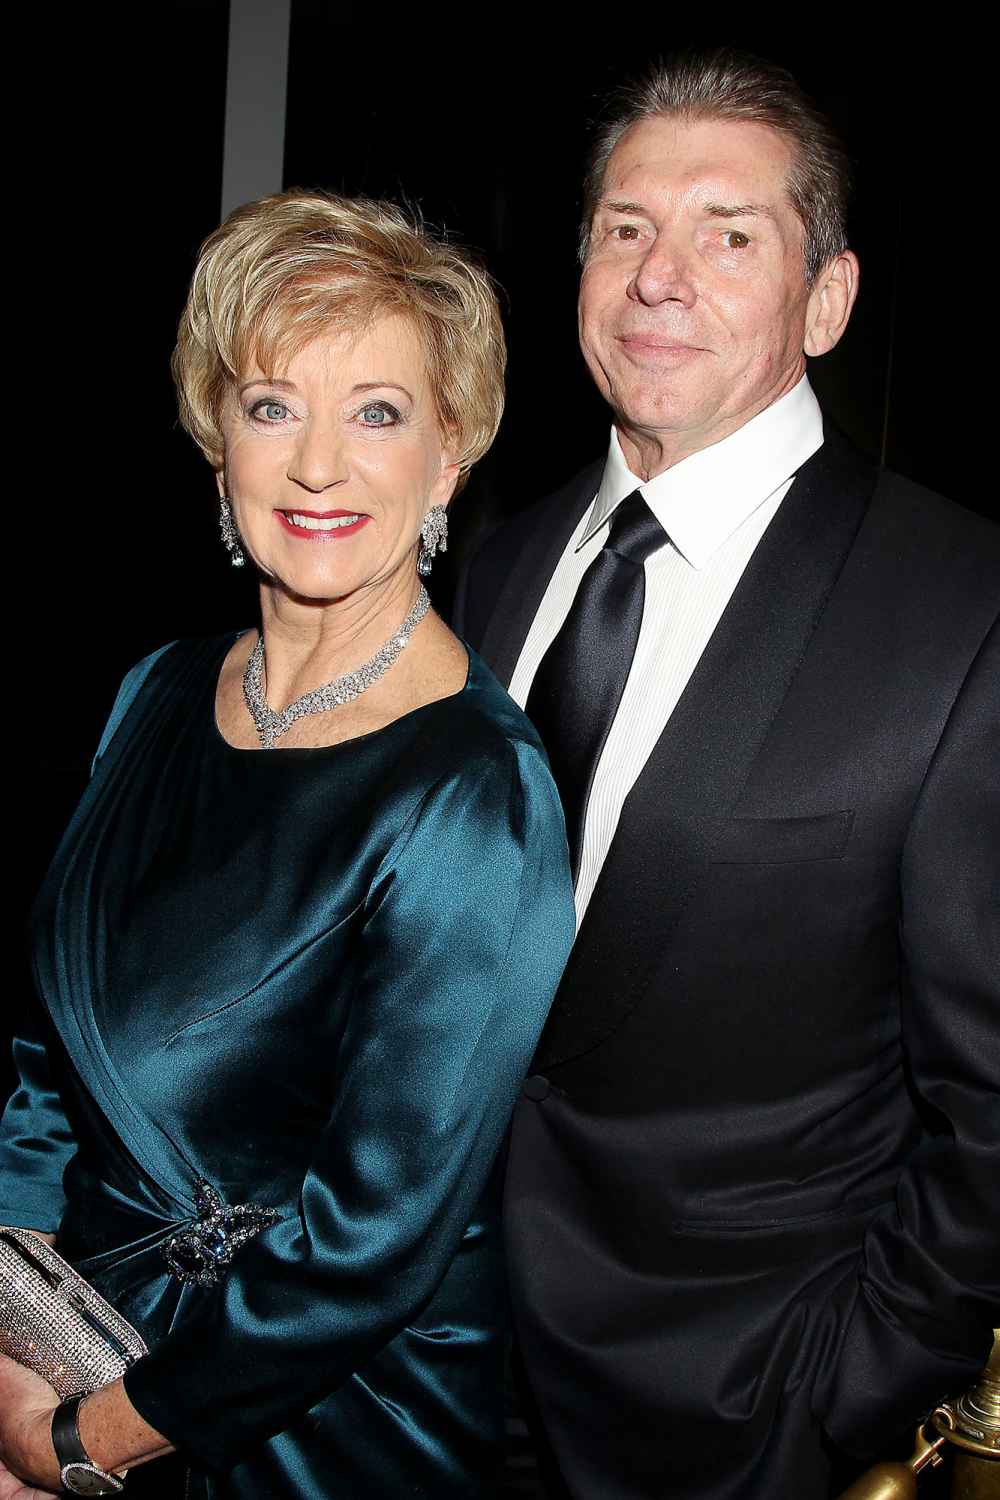 WWE CEO Vince McMahon Steps Down Amid Ongoing Misconduct Investigation 3 Linda McMahon